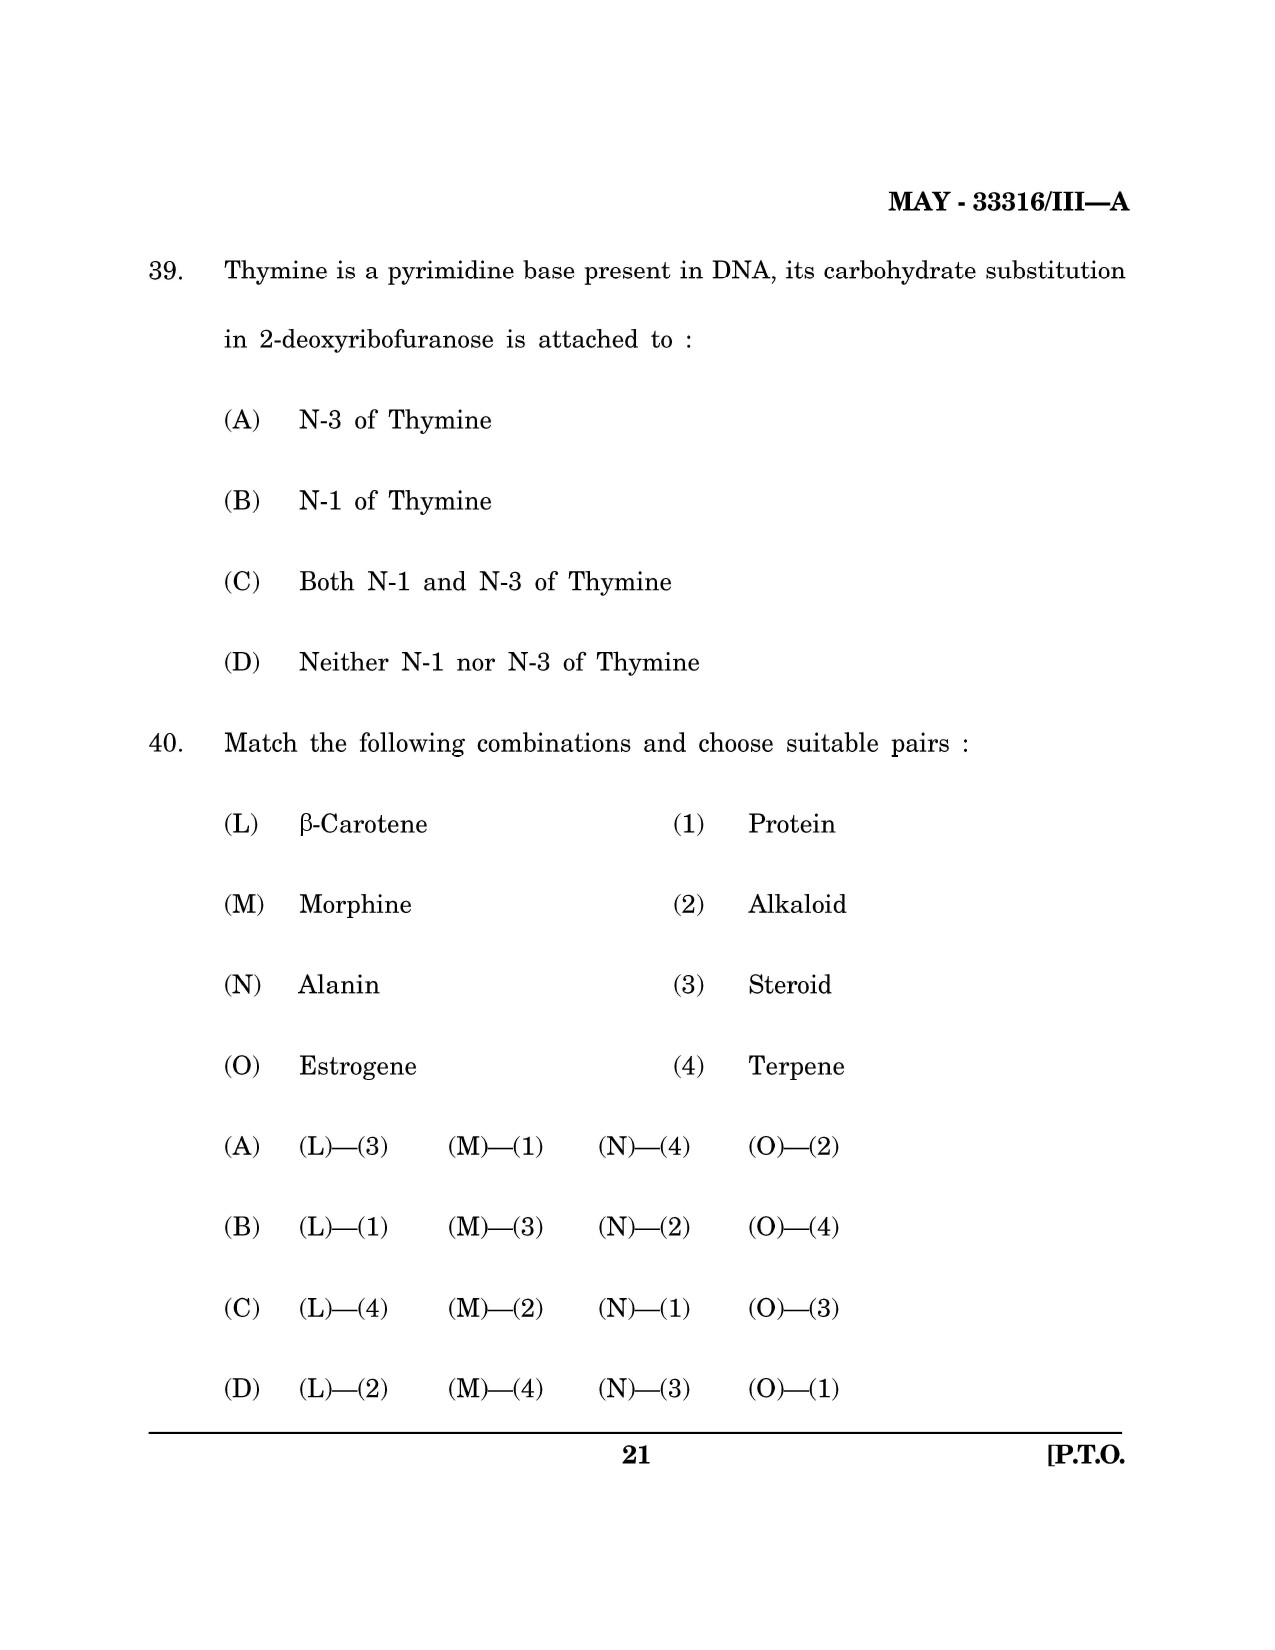 Maharashtra SET Chemical Sciences Question Paper III May 2016 20